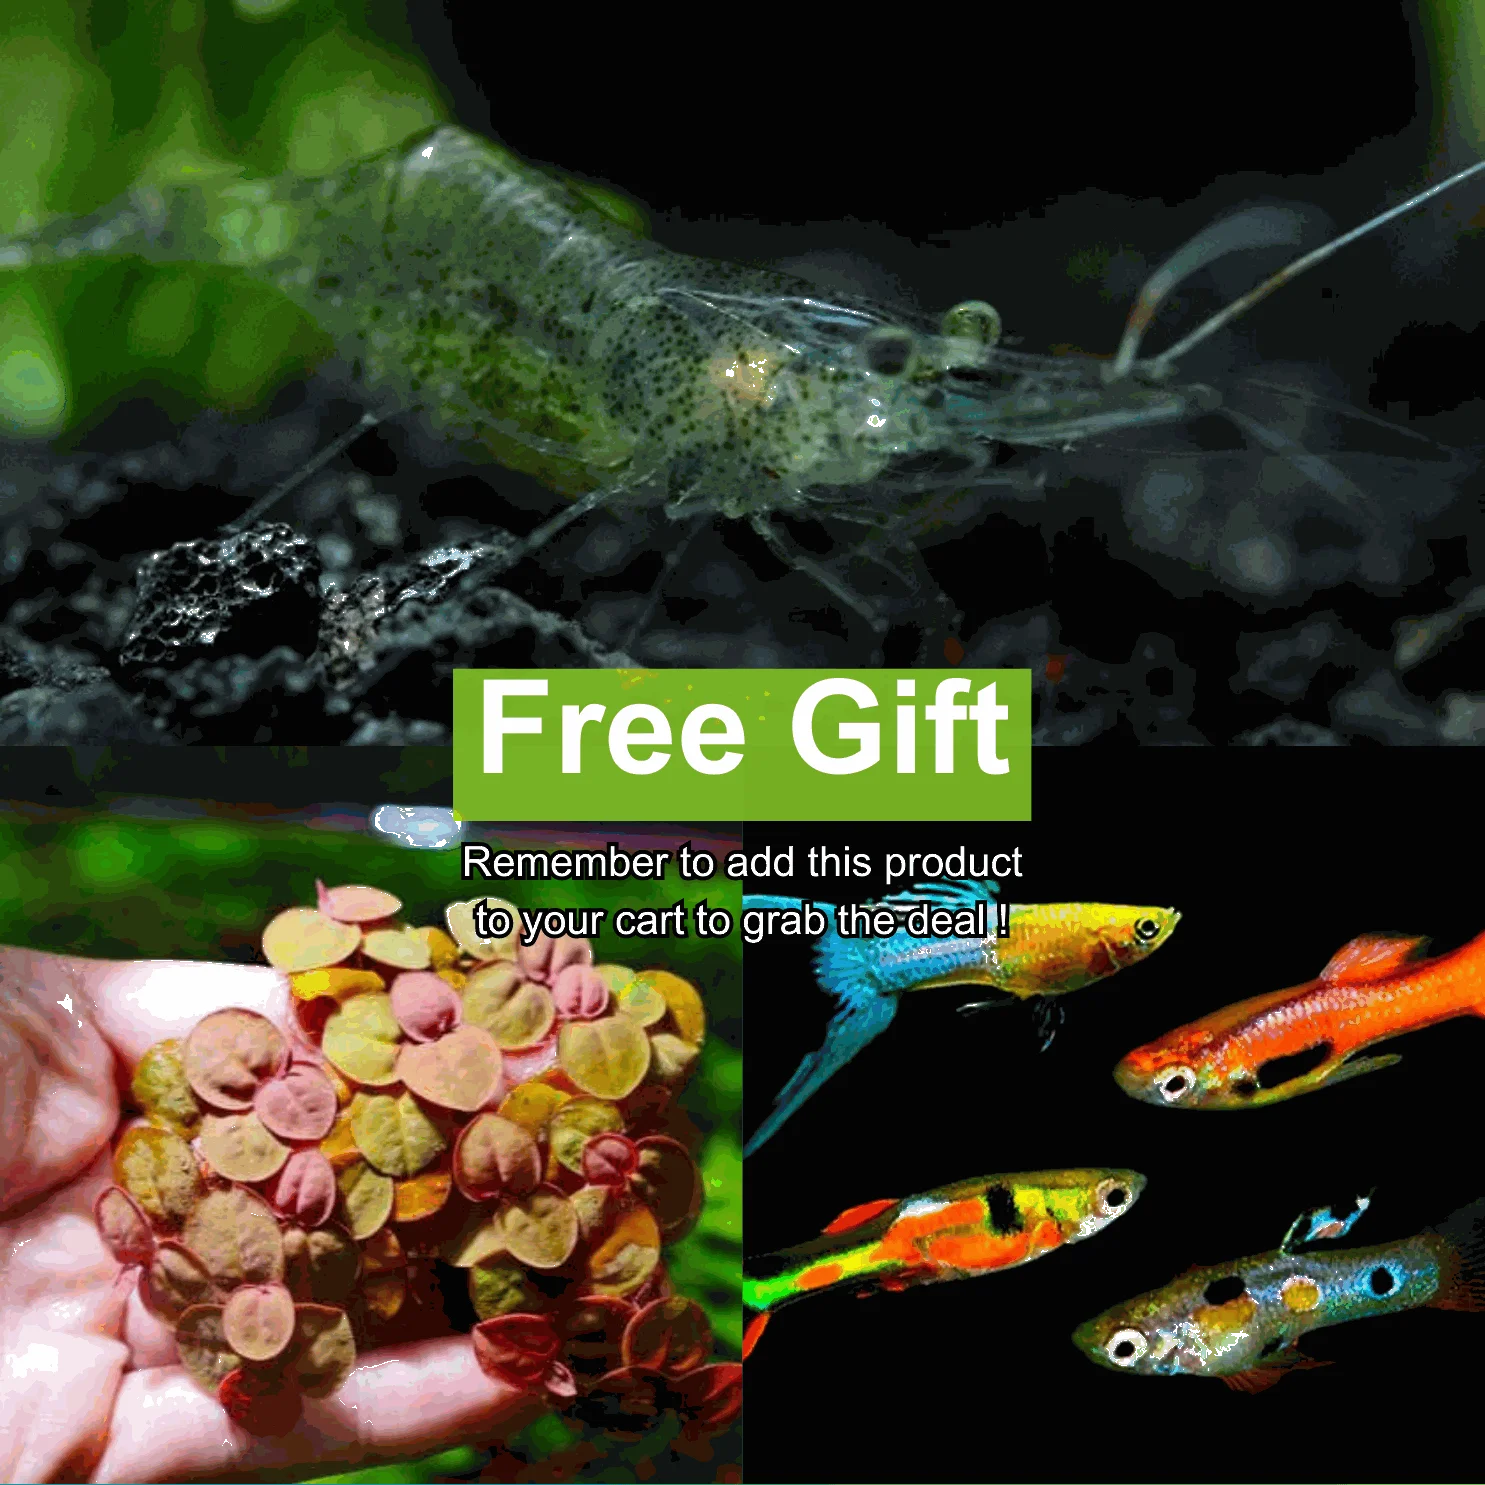 Free Gift For Order From 80 - 2x Assorted guppy male + 10x Ghost Shrimp + 1 Red root floater portion - Use code: GIFT180 (20 code available only)